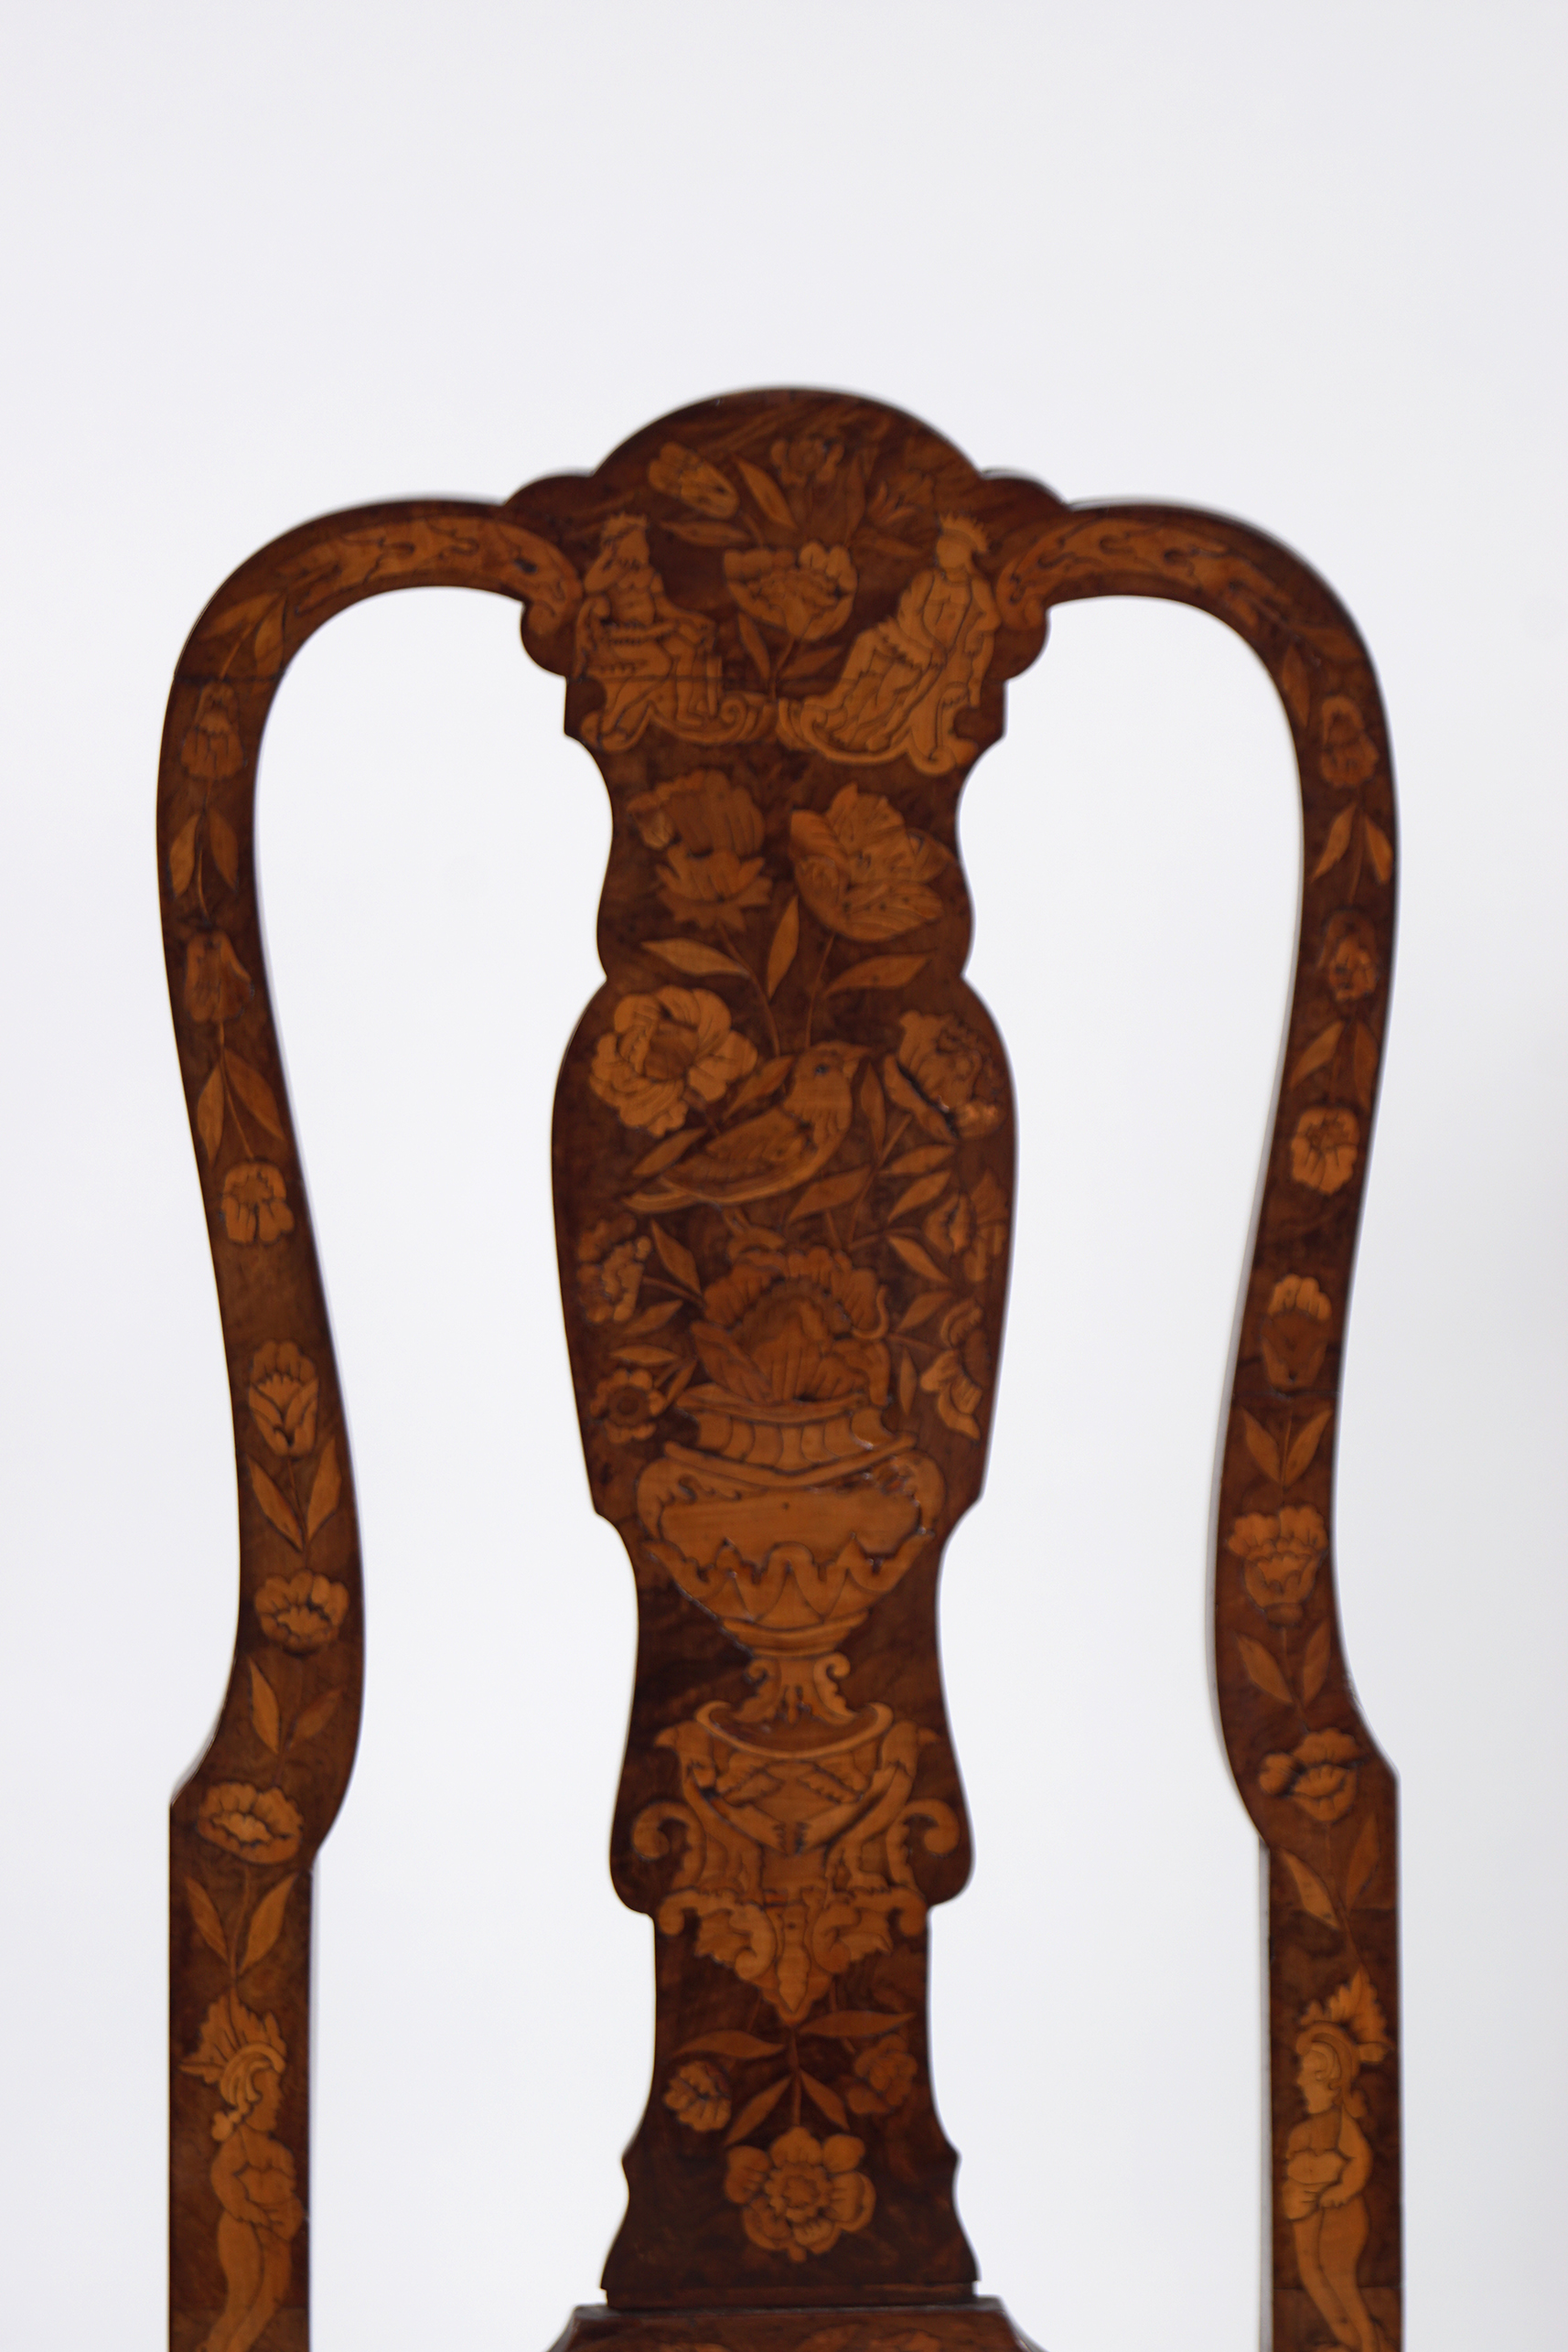 PAIR OF 19TH-CENTURY DUTCH MARQUETRY CHAIRS - Image 3 of 3